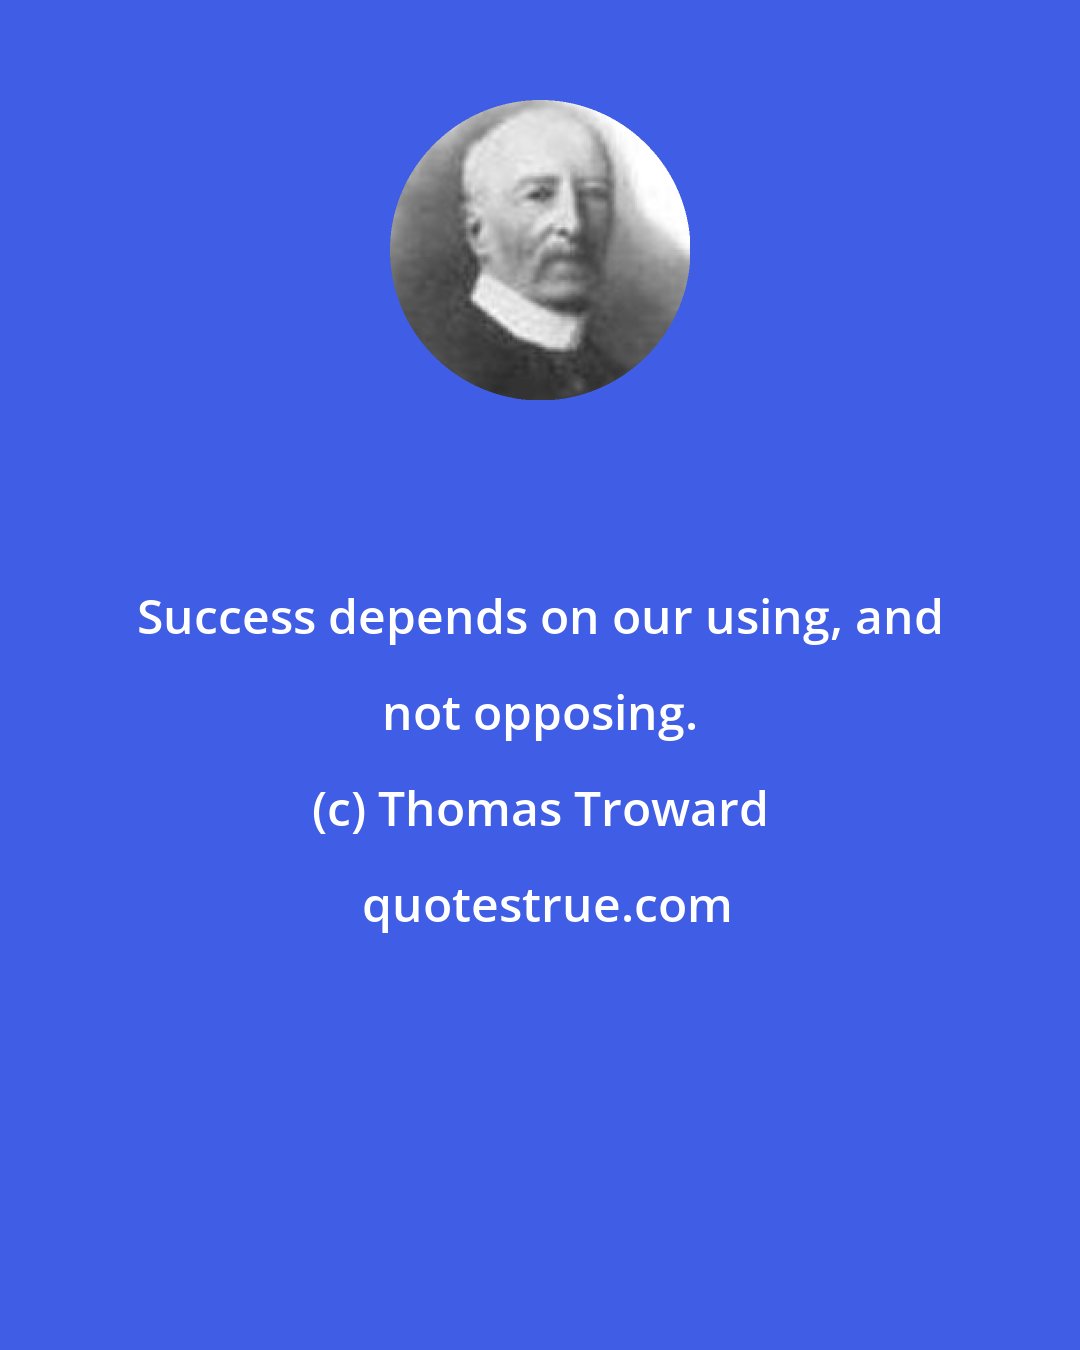 Thomas Troward: Success depends on our using, and not opposing.